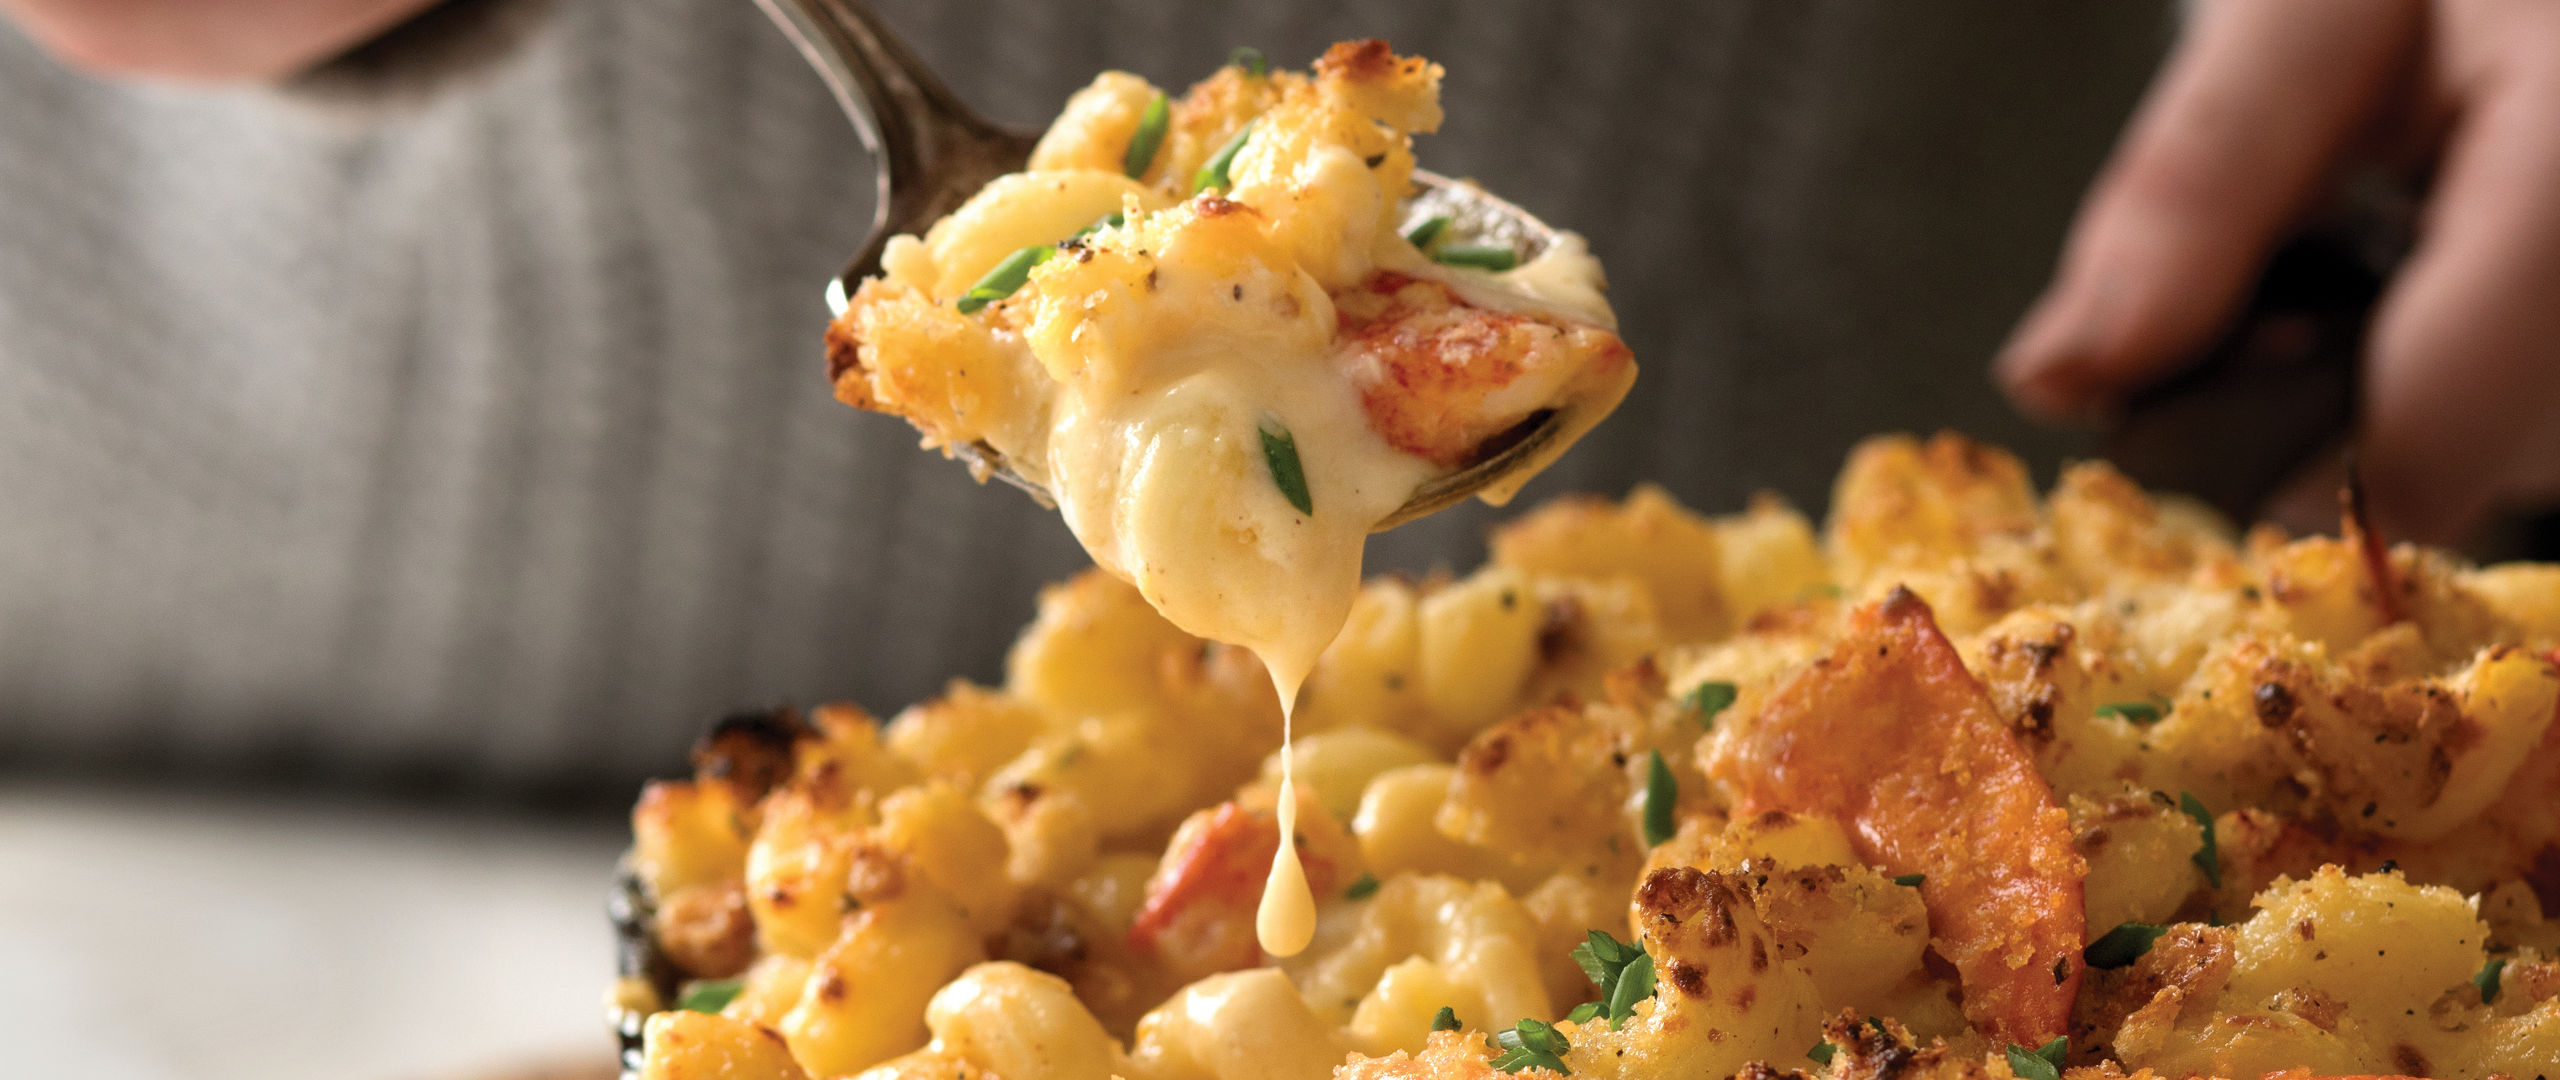 Decadent lobster mac and cheese served in a kitchen with white quartz countertops.